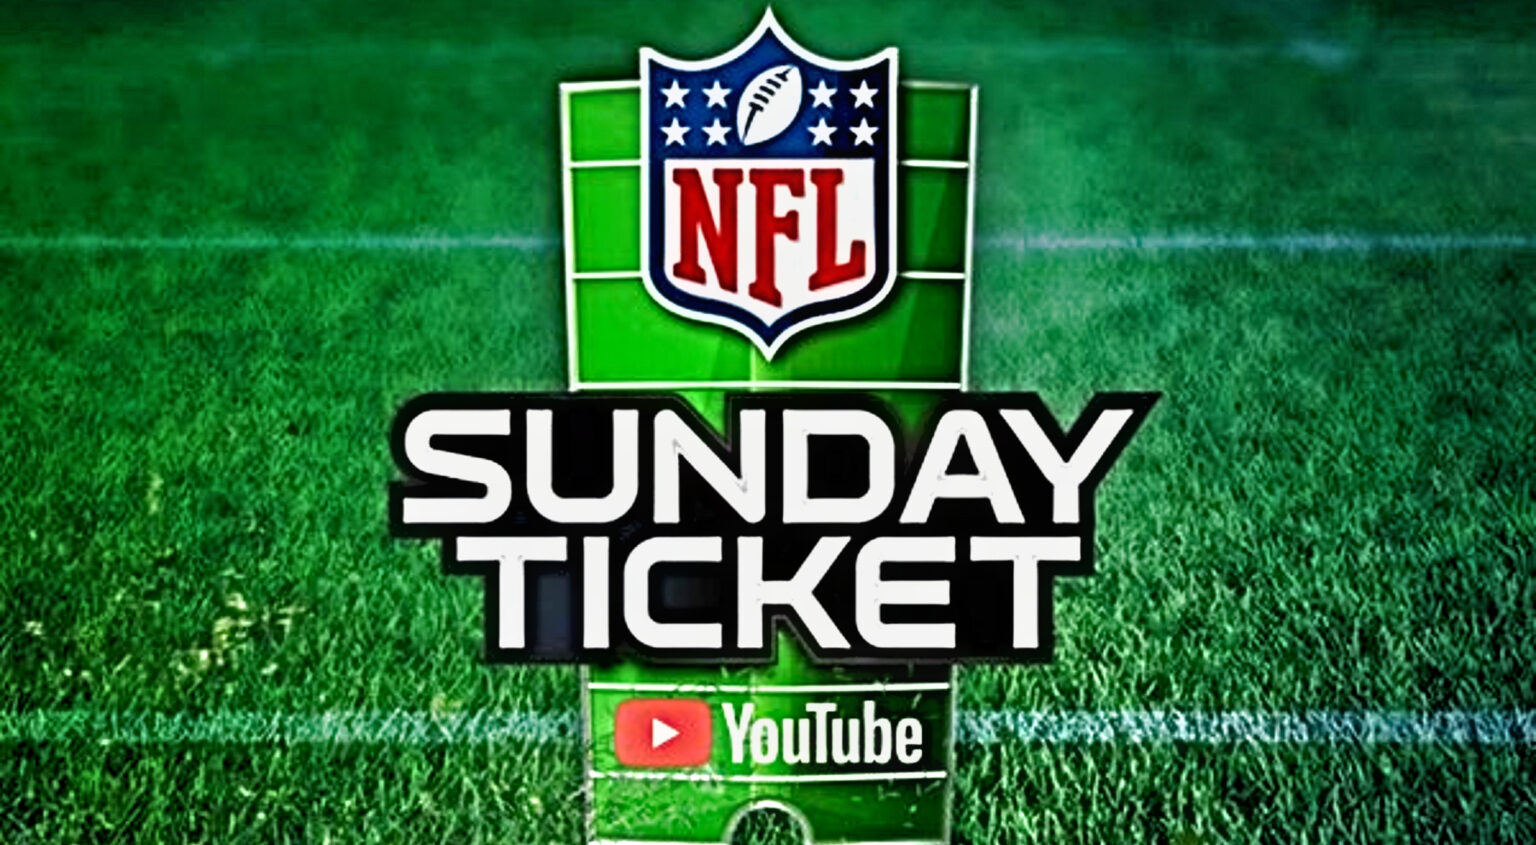 YouTube Announces Pricing Tiers For NFL Sunday Ticket